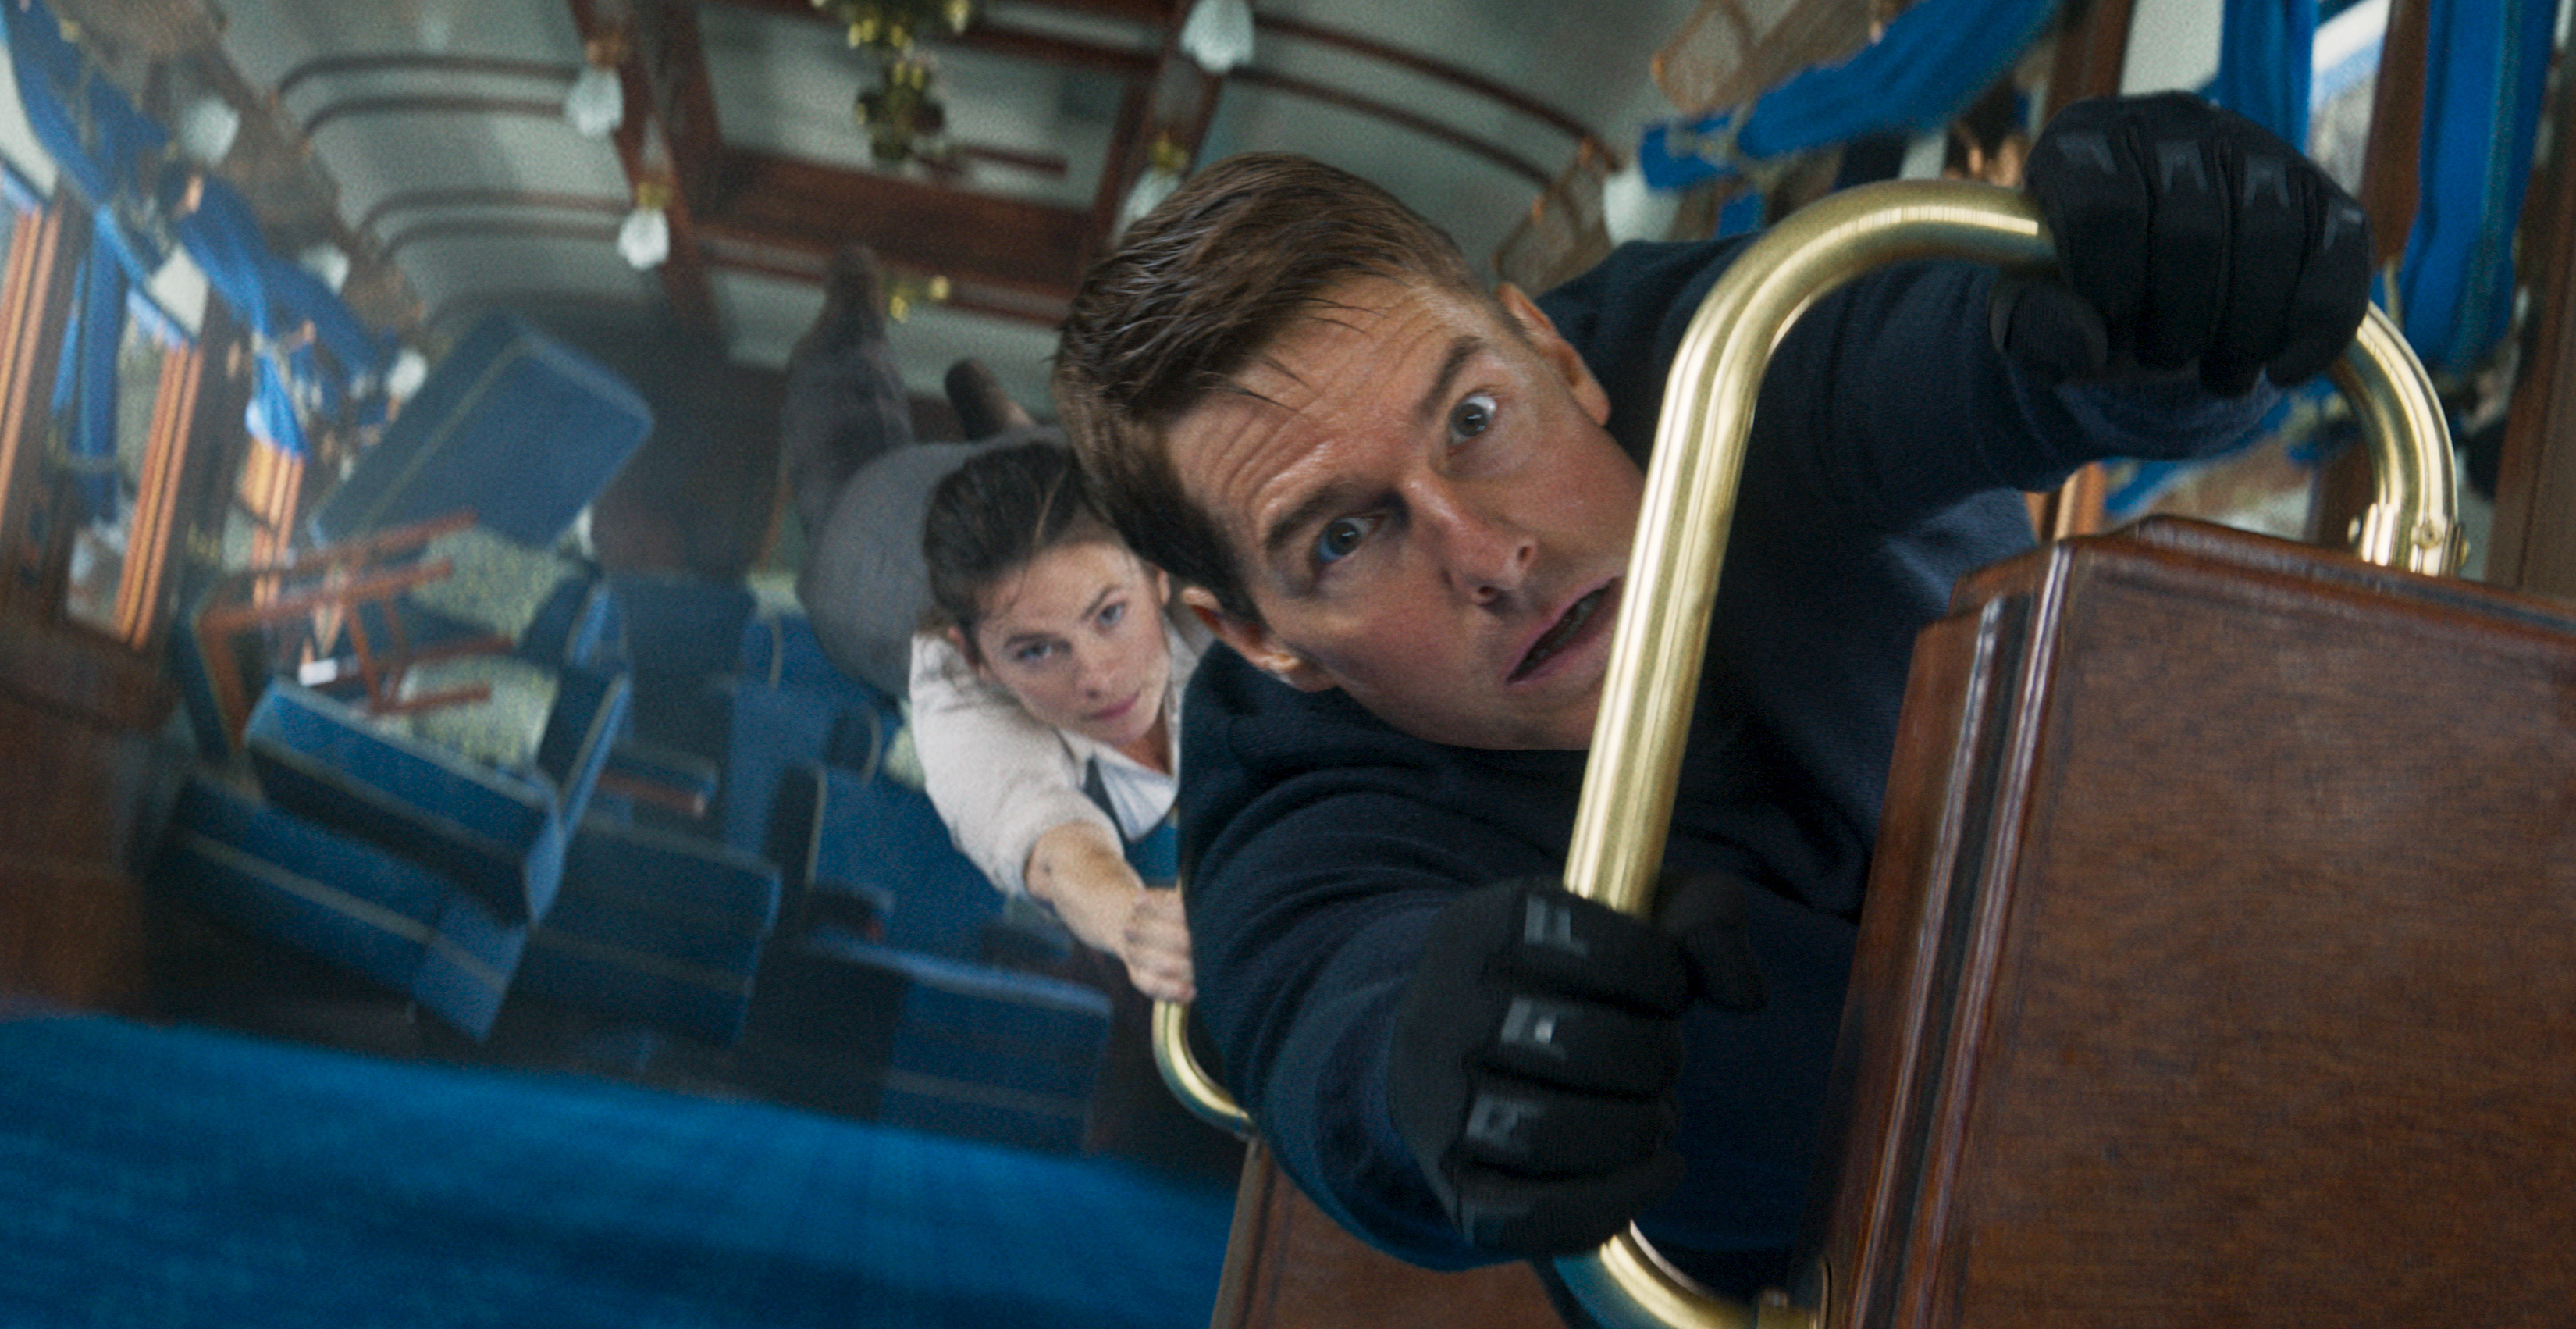 Tom Cruise as Ethan Hunt holds on to a railing in a train car turned vertical as Hayley Atwell clings on to him in Mission: Impossible — Dead Reckoning Part One